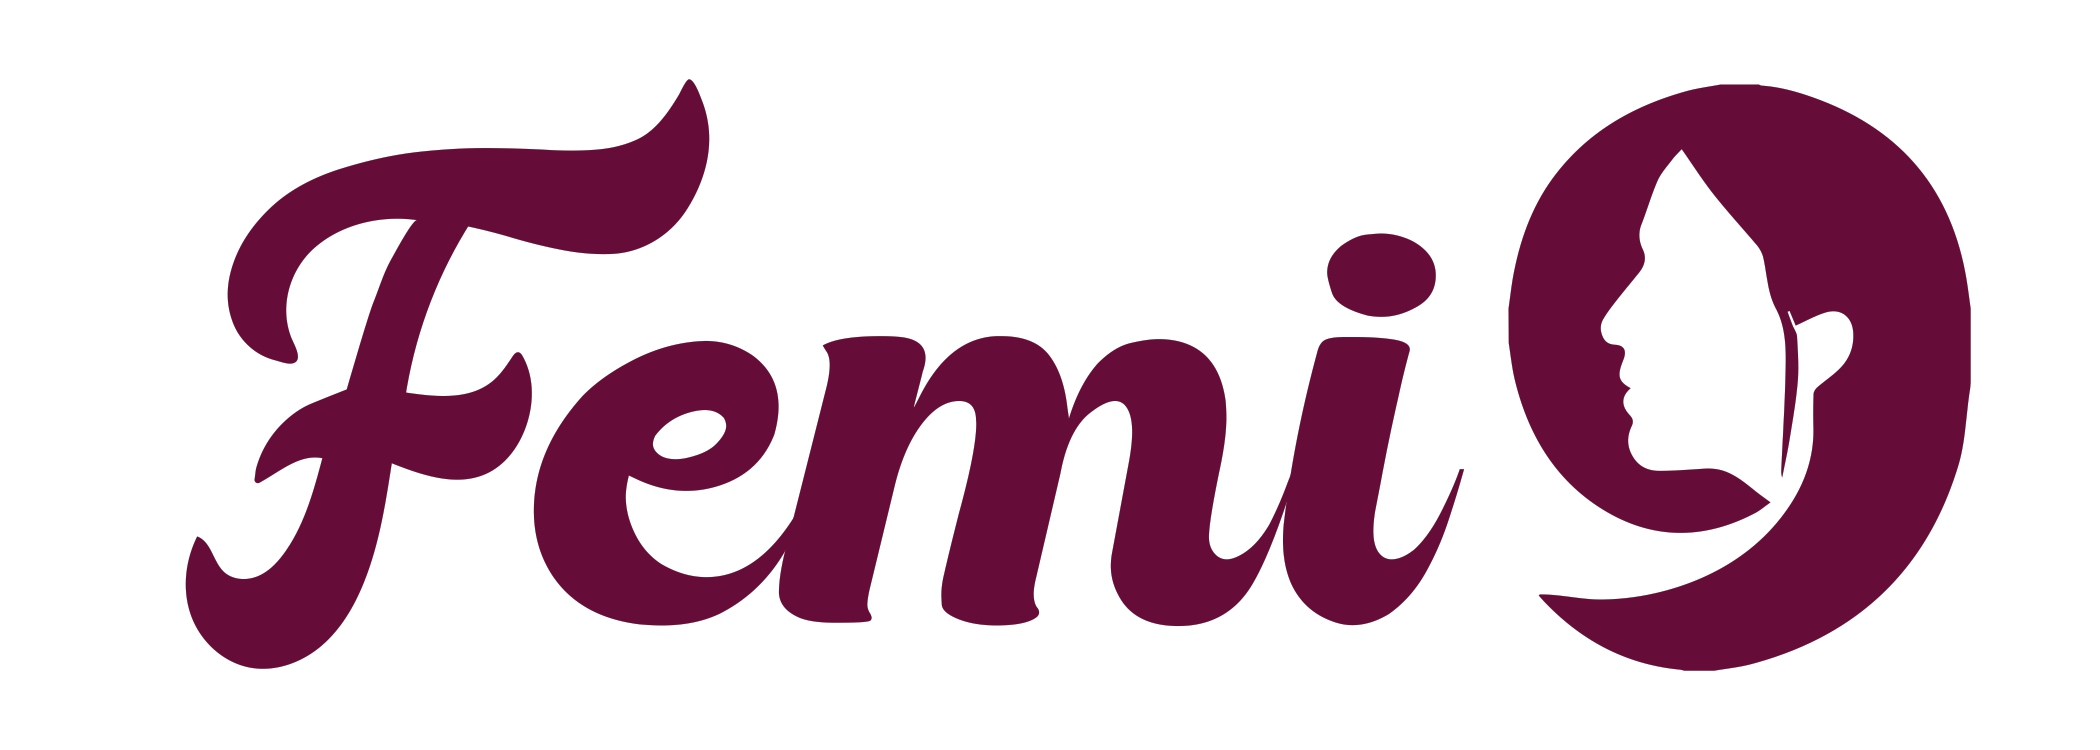 Terms & Conditions | Femme